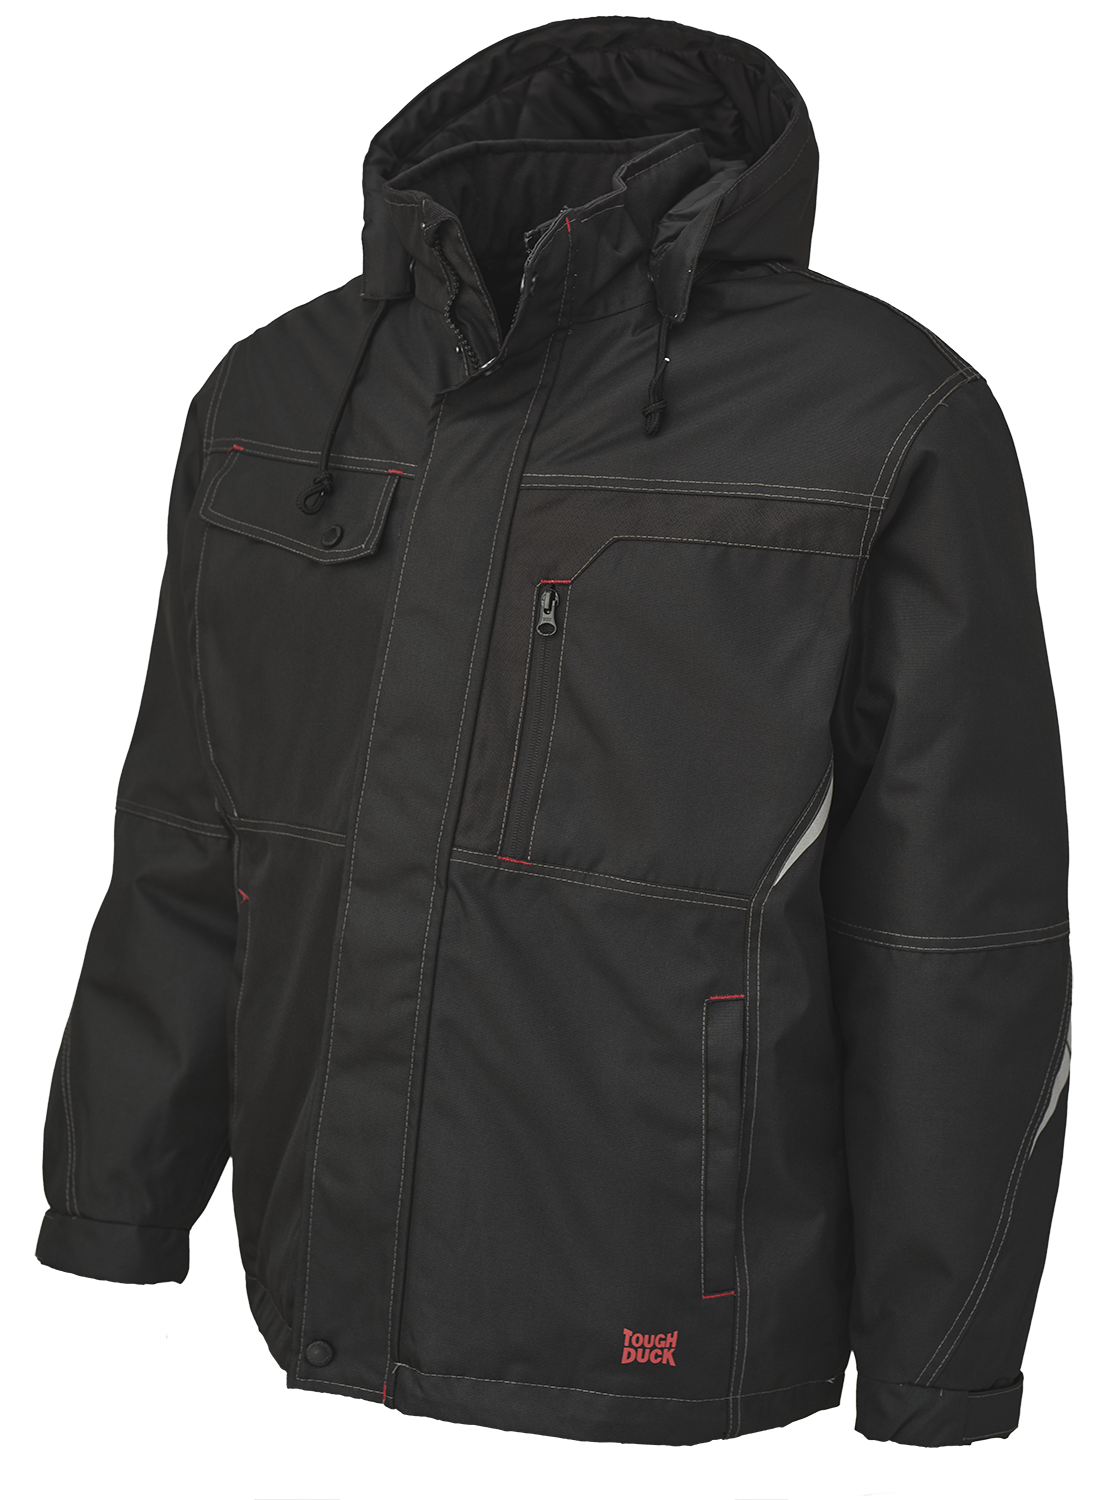 Tough Duck Men's Winter Work Jacket WJ24 150D Poly Oxford Insulated Wa